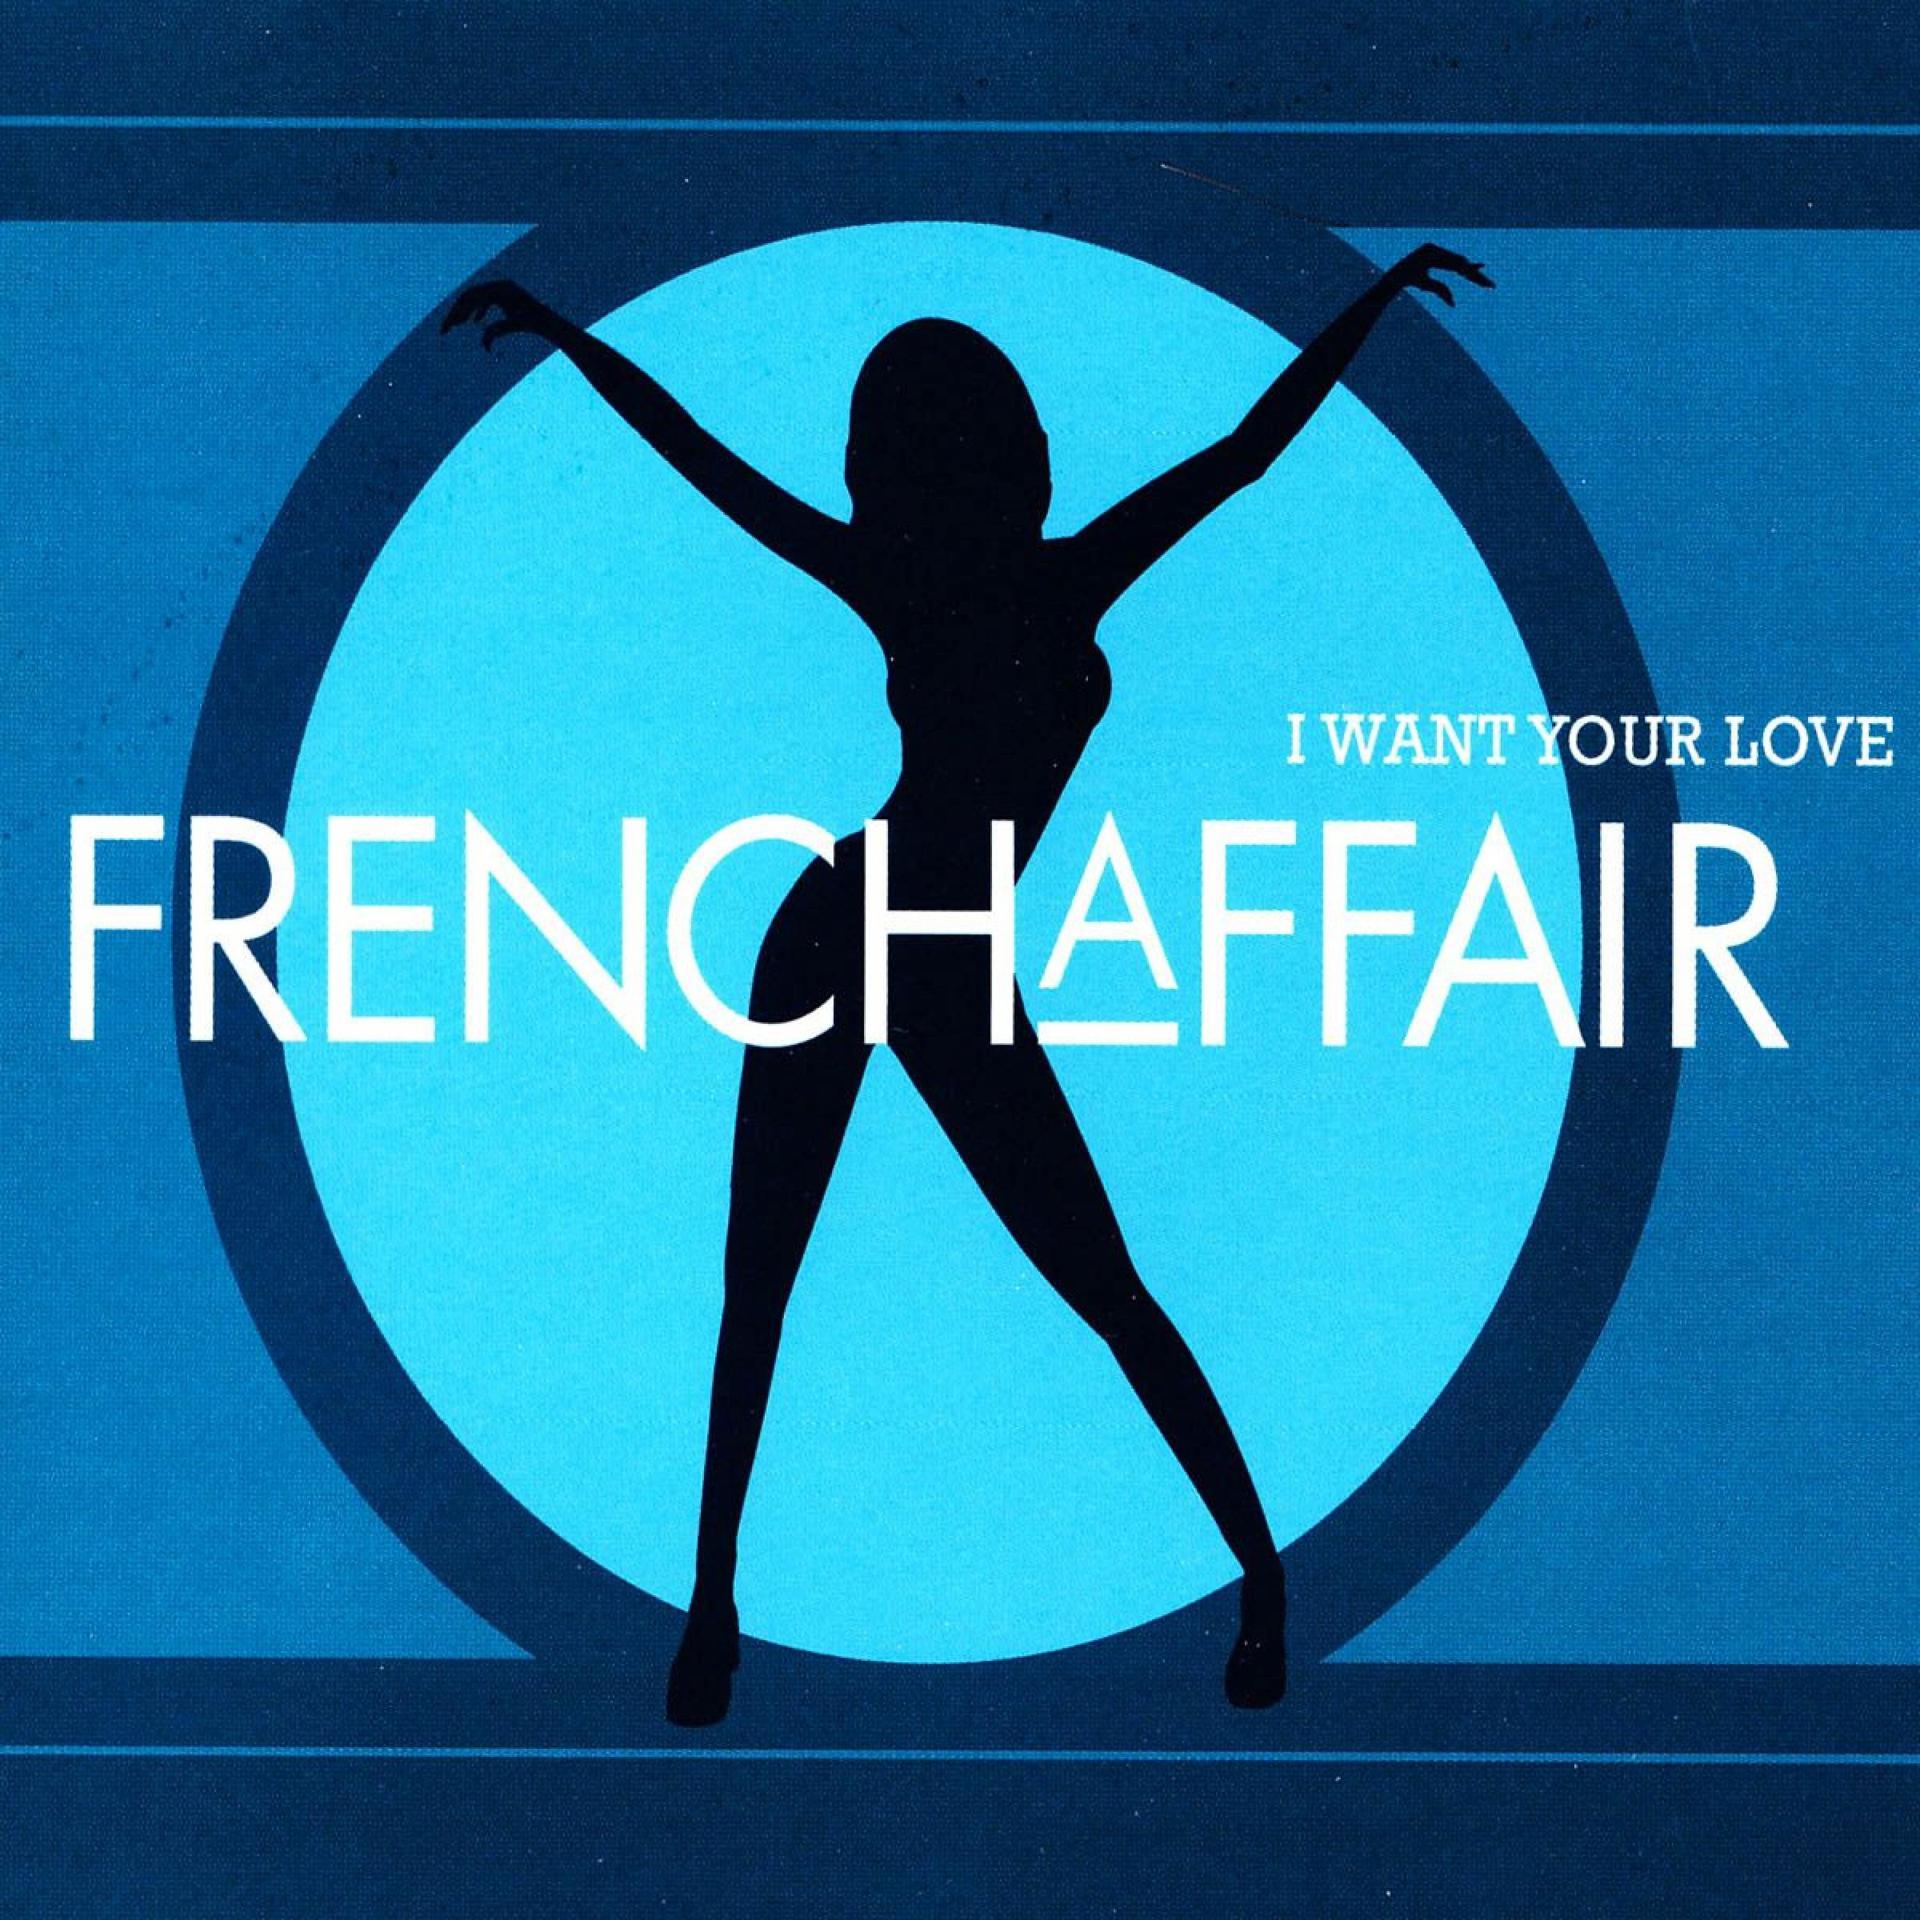 Comme ci comme ca french. Барбара Алсиндор French Affair. French Affair обложки альбомов. French Affair comme ci comme CA. I want your Love песня.